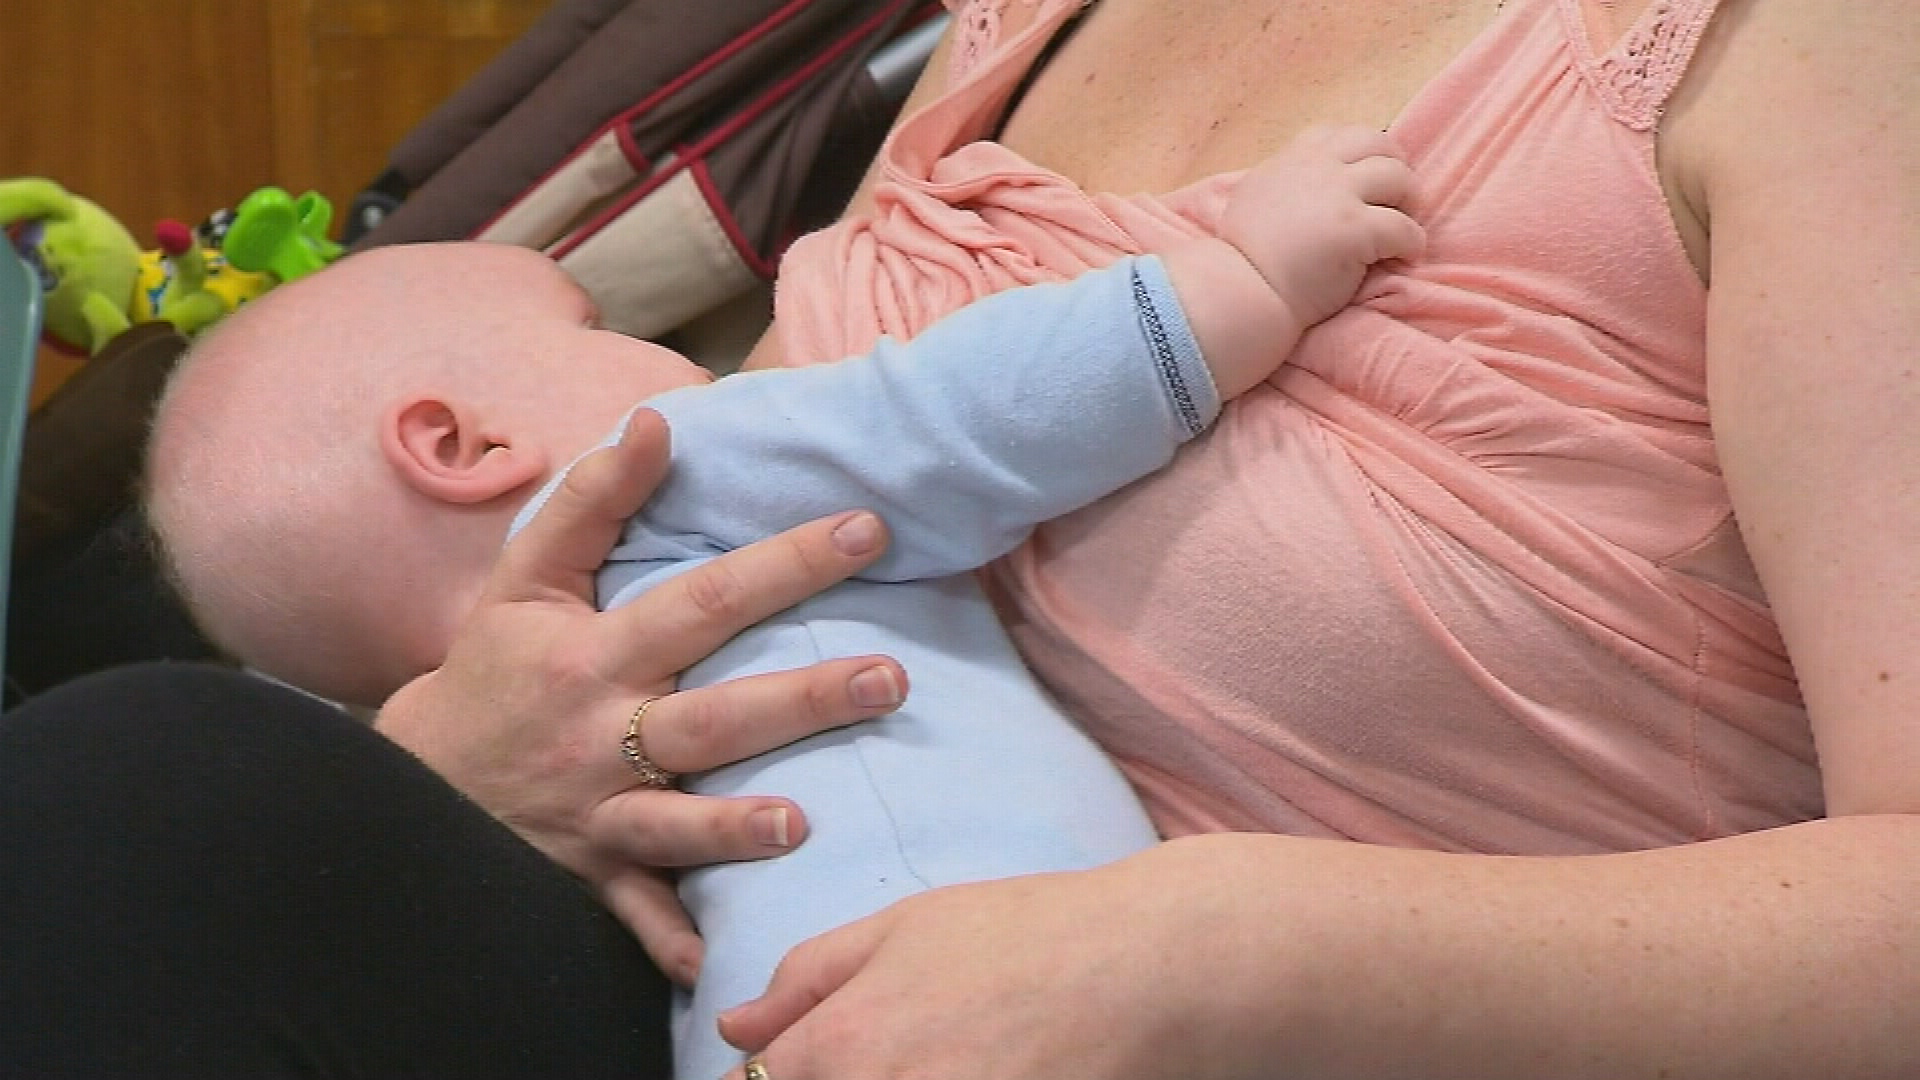 92% of mums say their breastfeeding experience has been negative